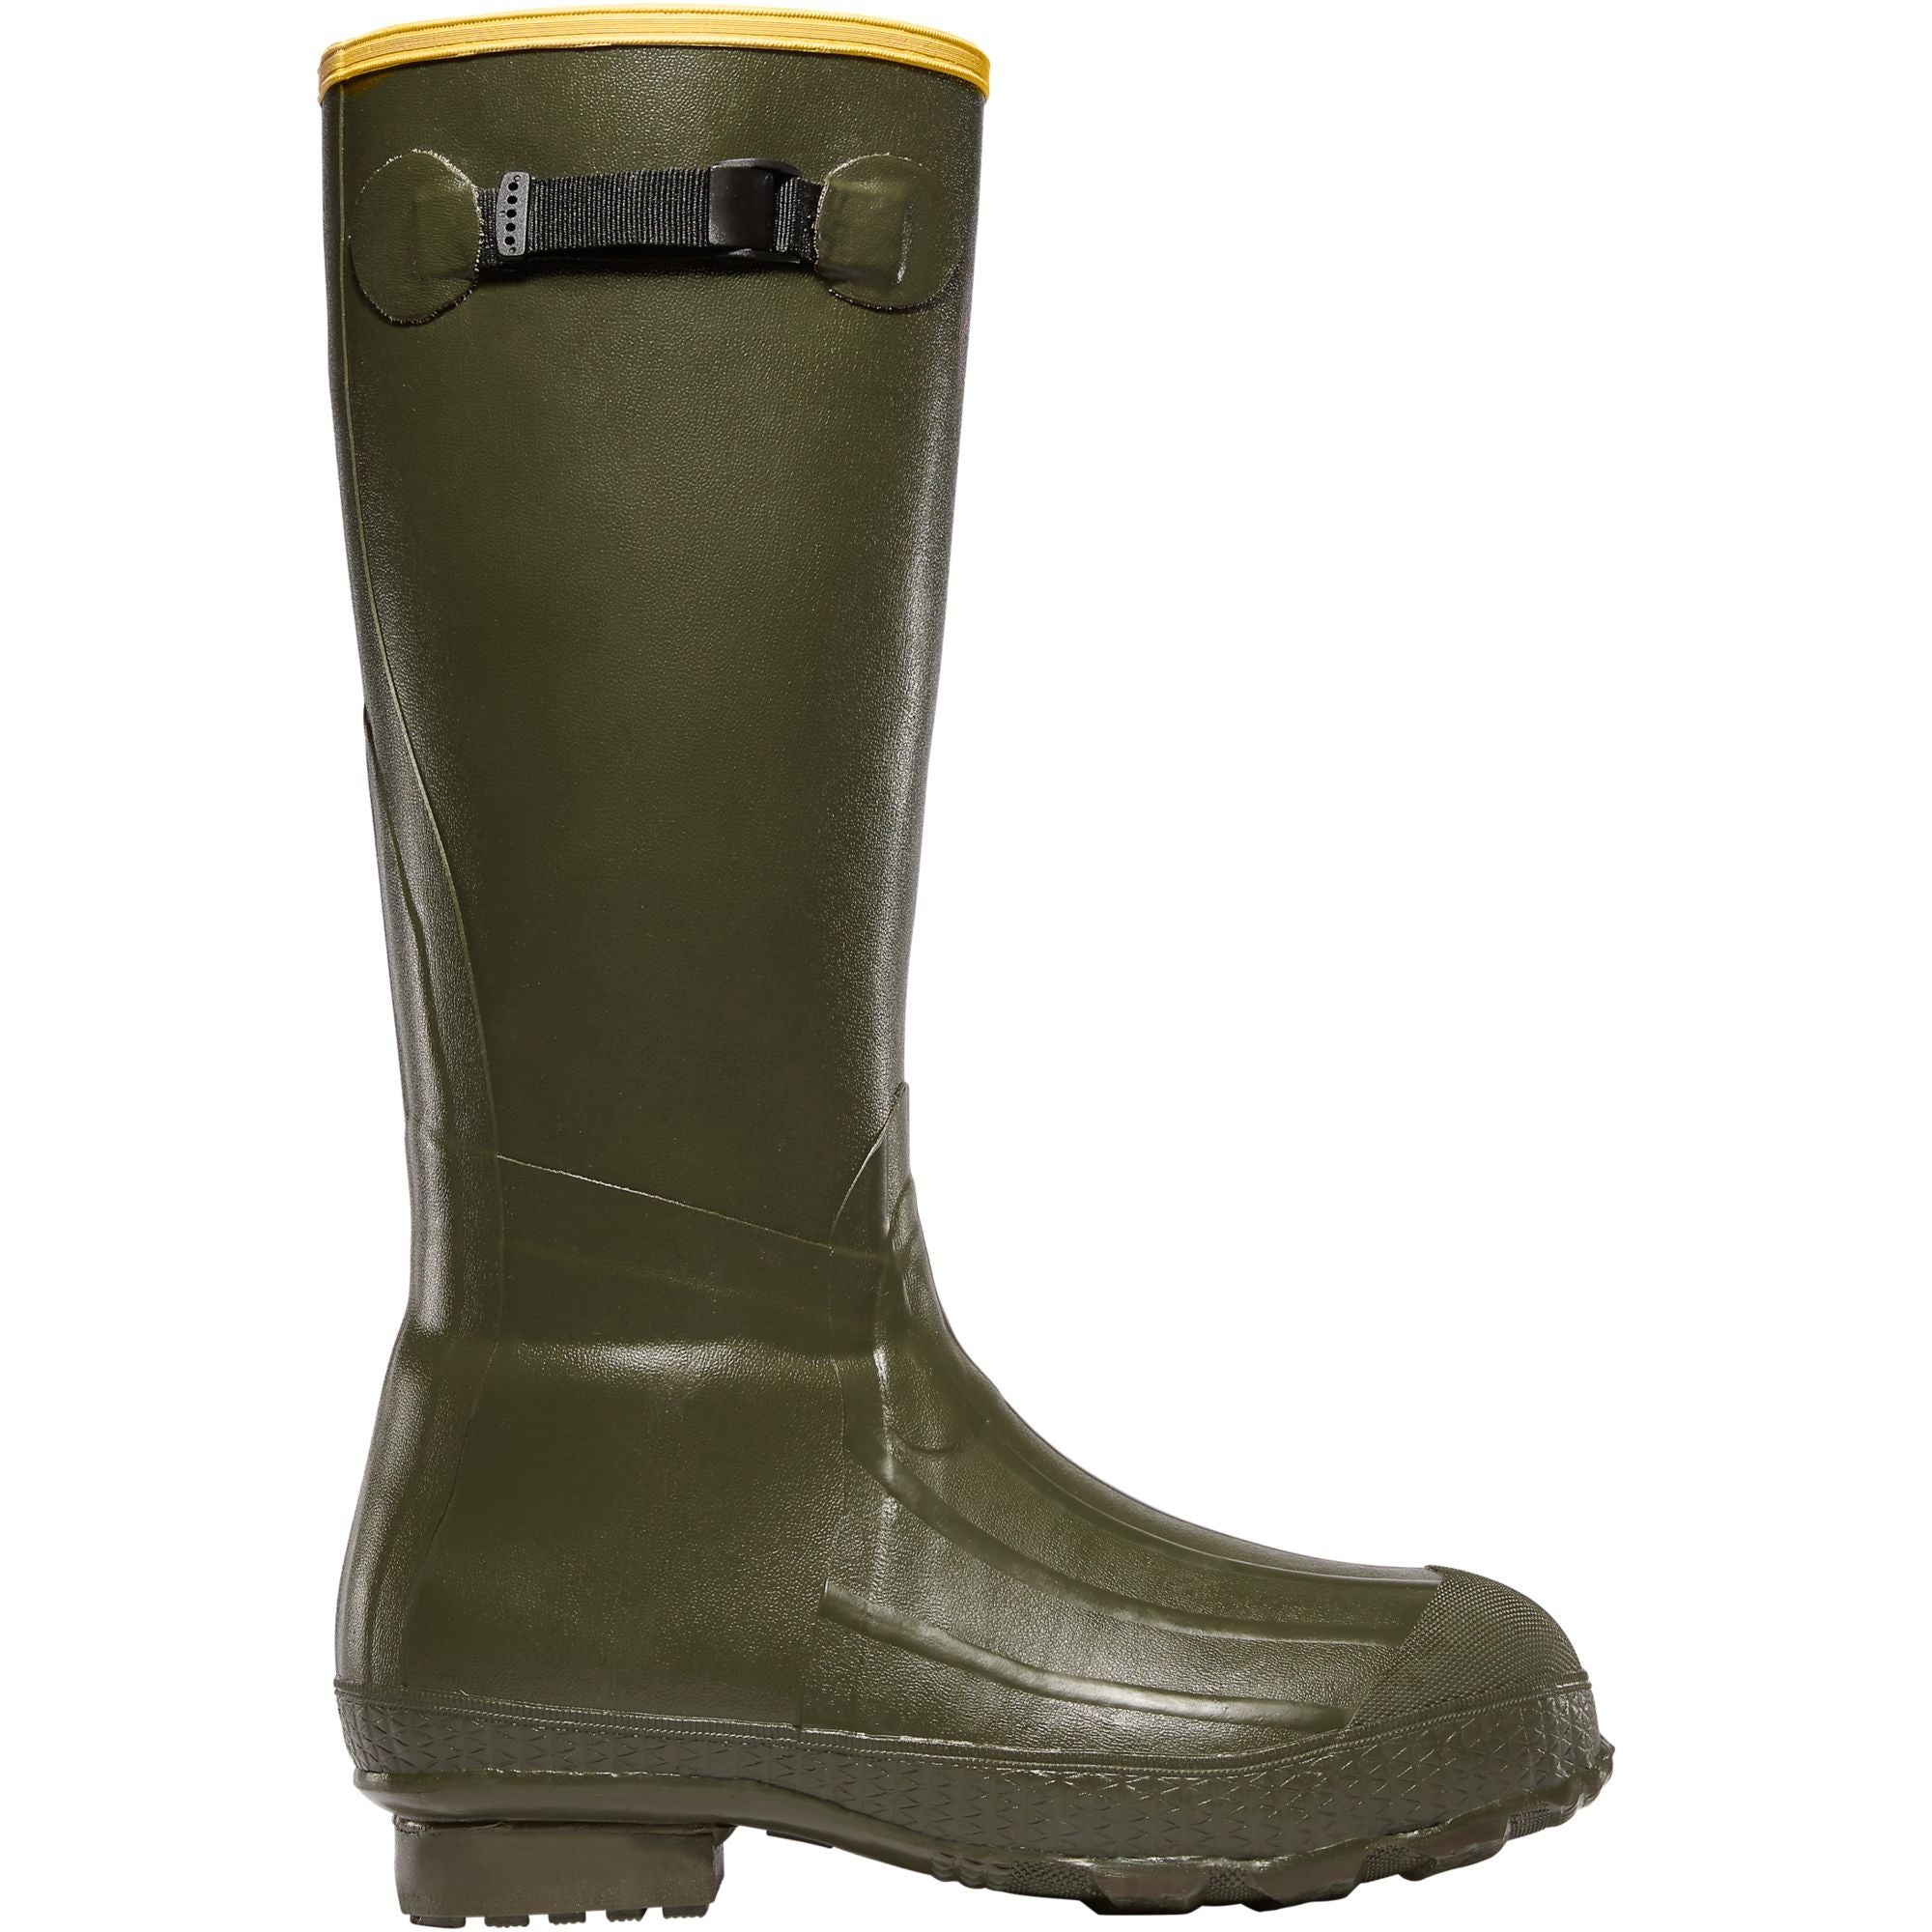 LaCrosse Men's Burly Classic 18" OD Rubber Work Boot - Green - 266040 7 / Green - Overlook Boots